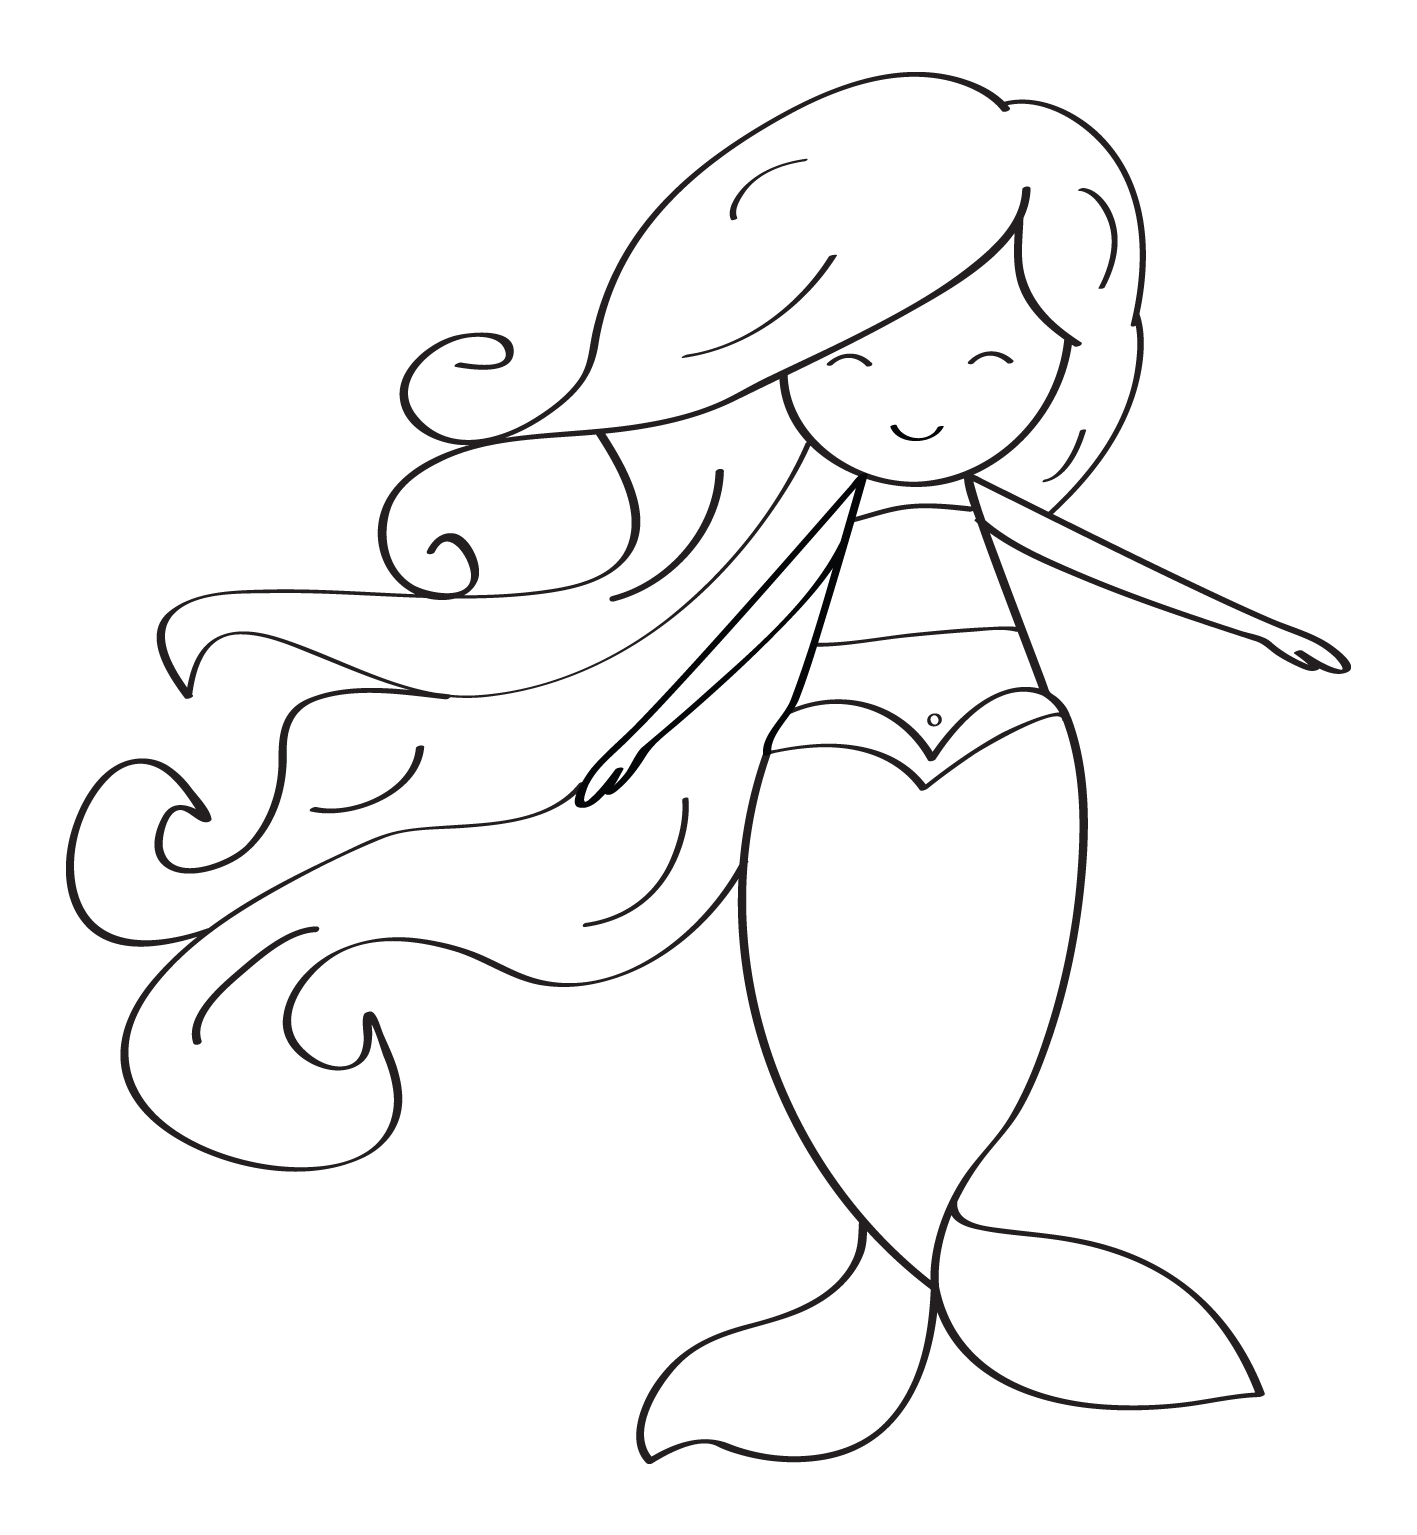 Free Pin The Tail On The Mermaid Template